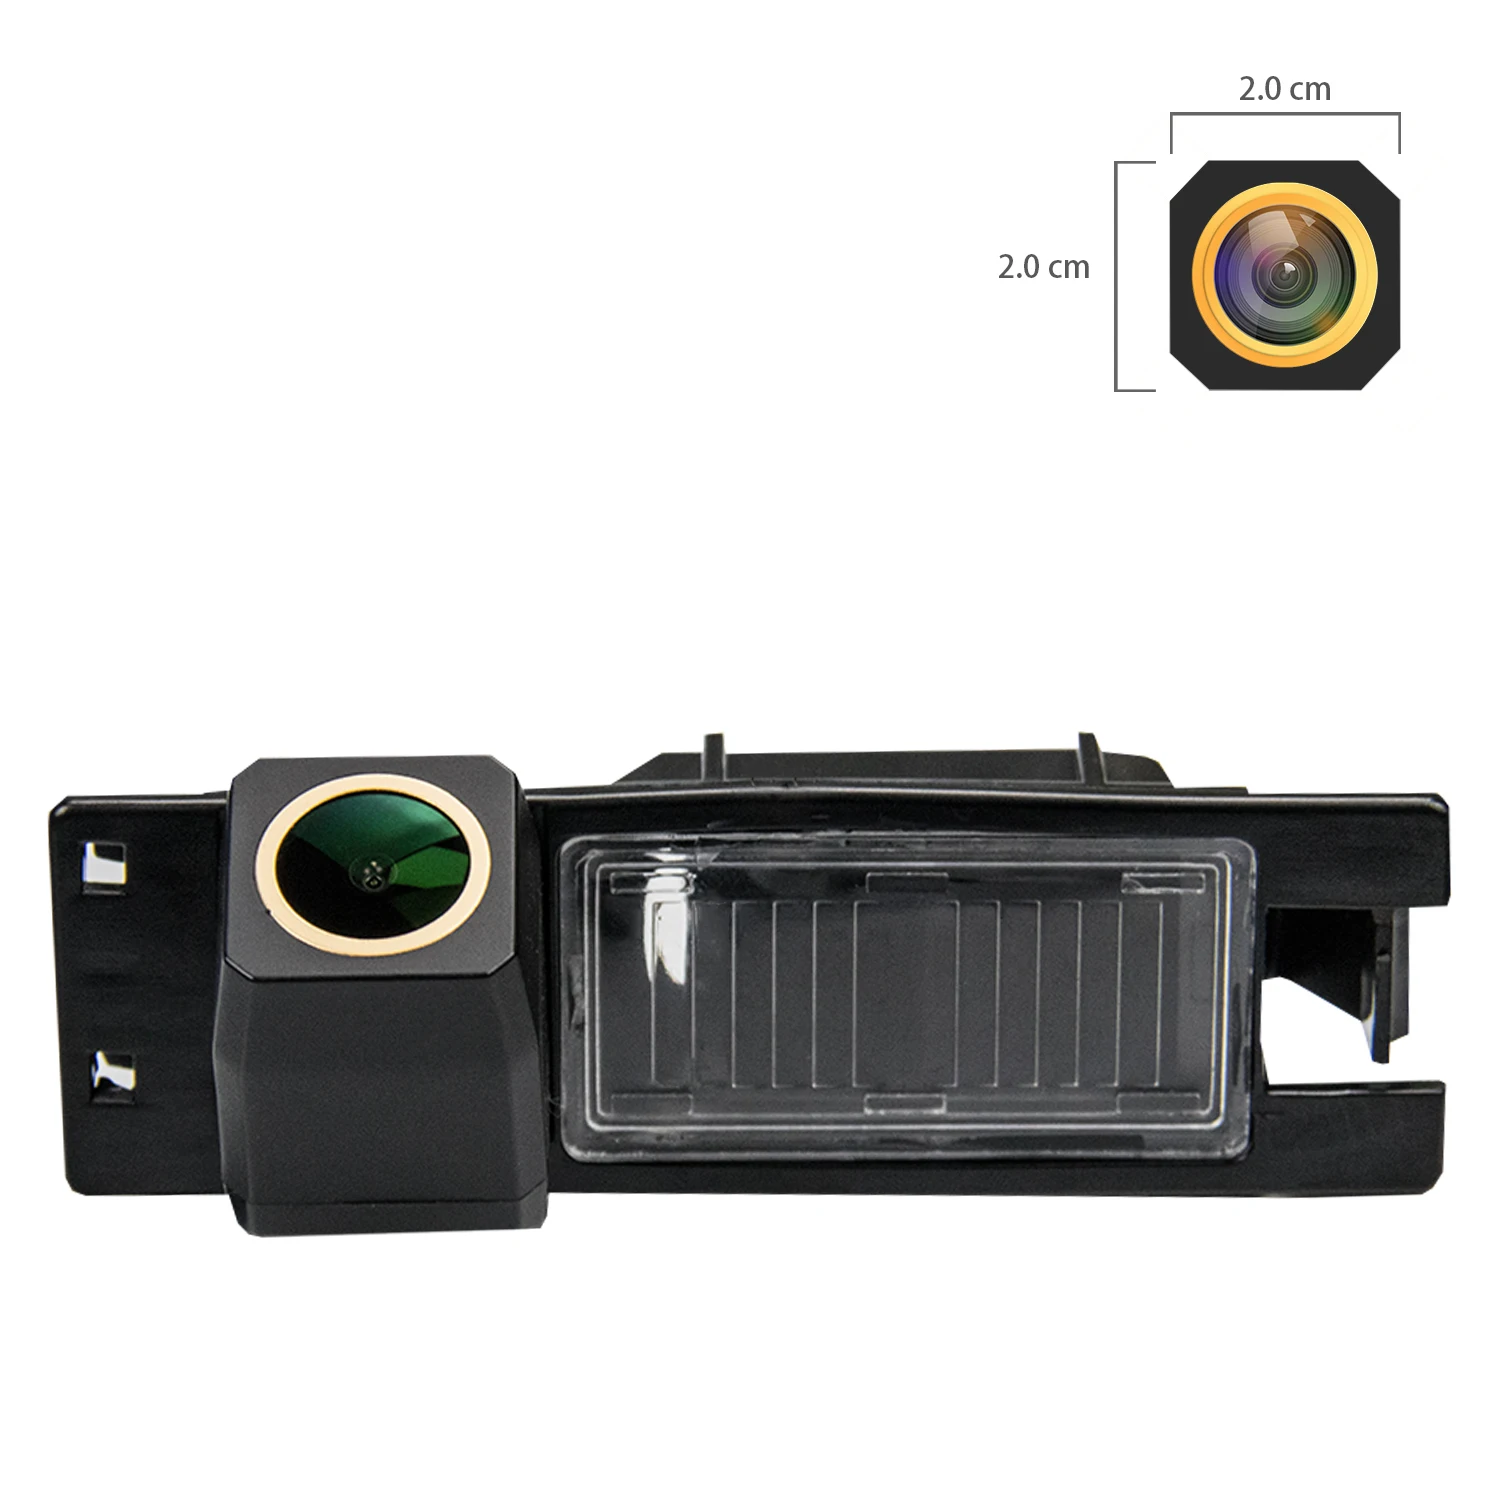 

Misayaee Golden HD Car Rear View Reverse Camera Plate Light for Buick Regal Verano Excelle /Excelle xt 12-15 Chevrolet Chevy Mal